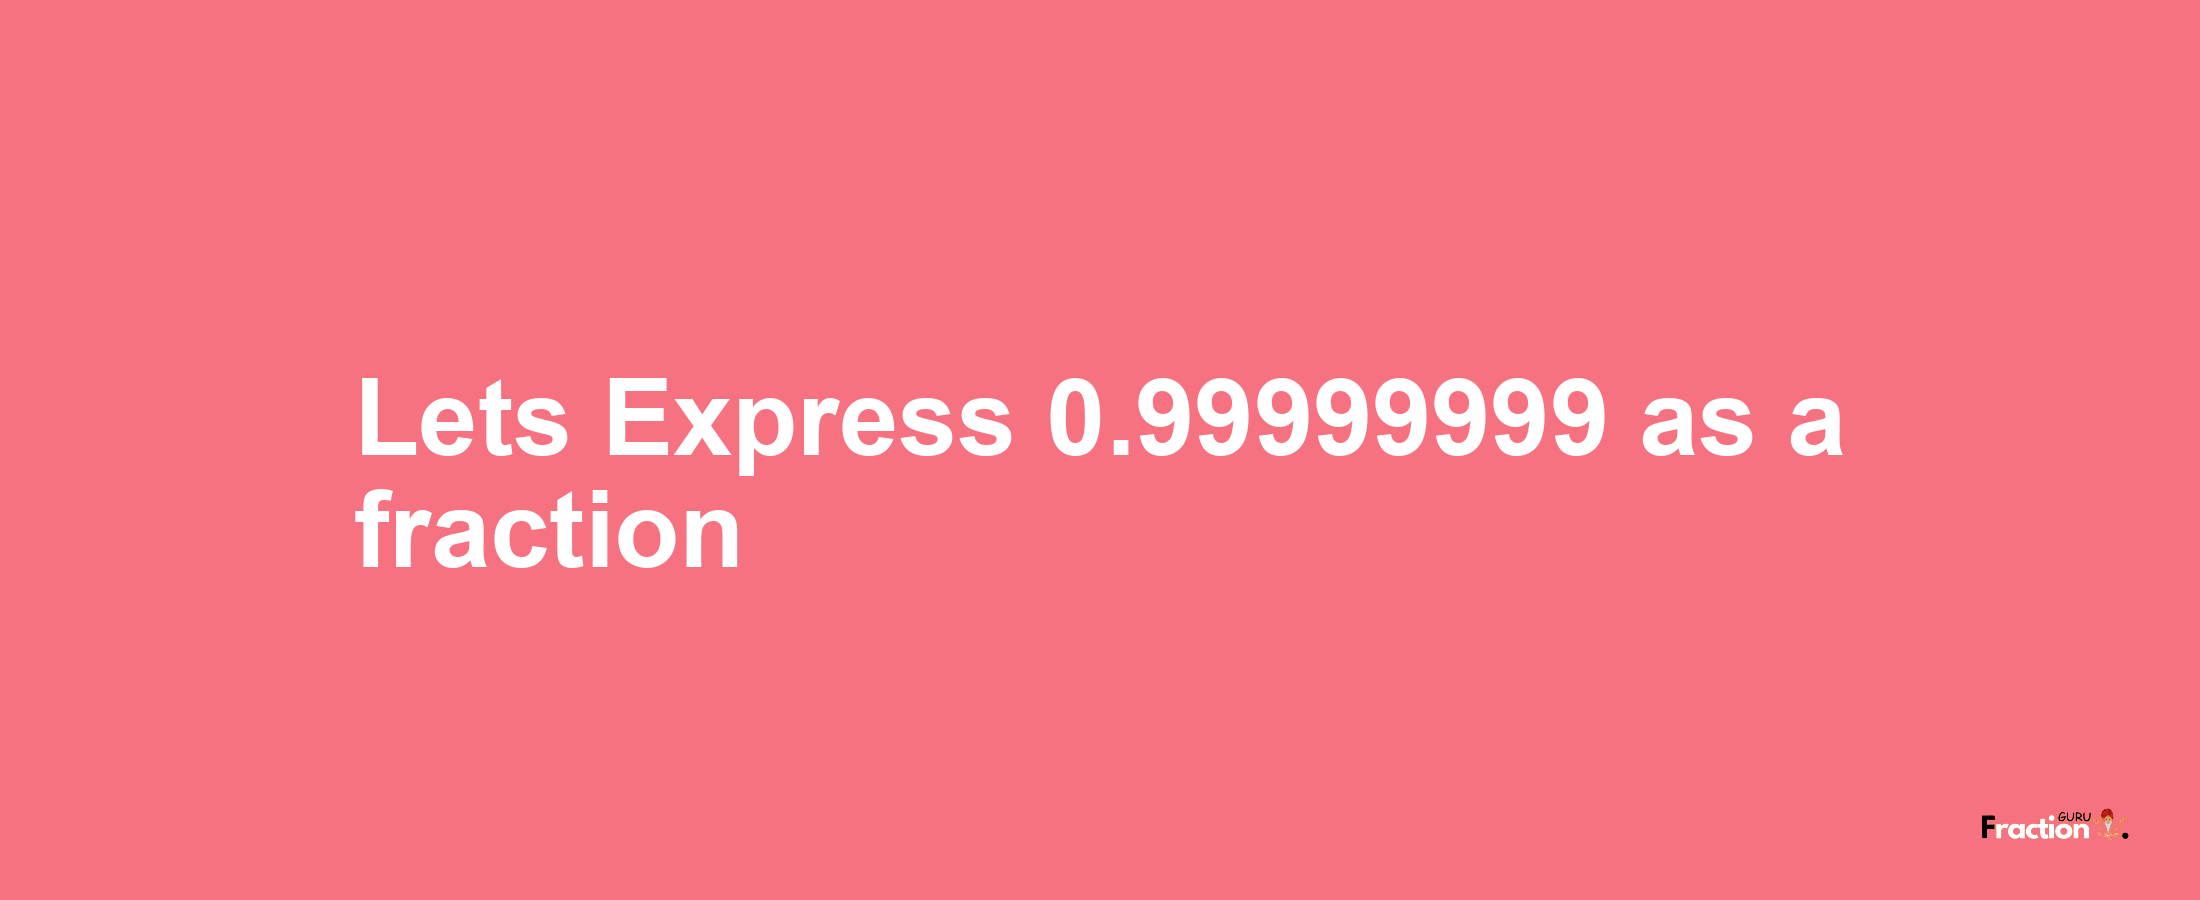 Lets Express 0.99999999 as afraction